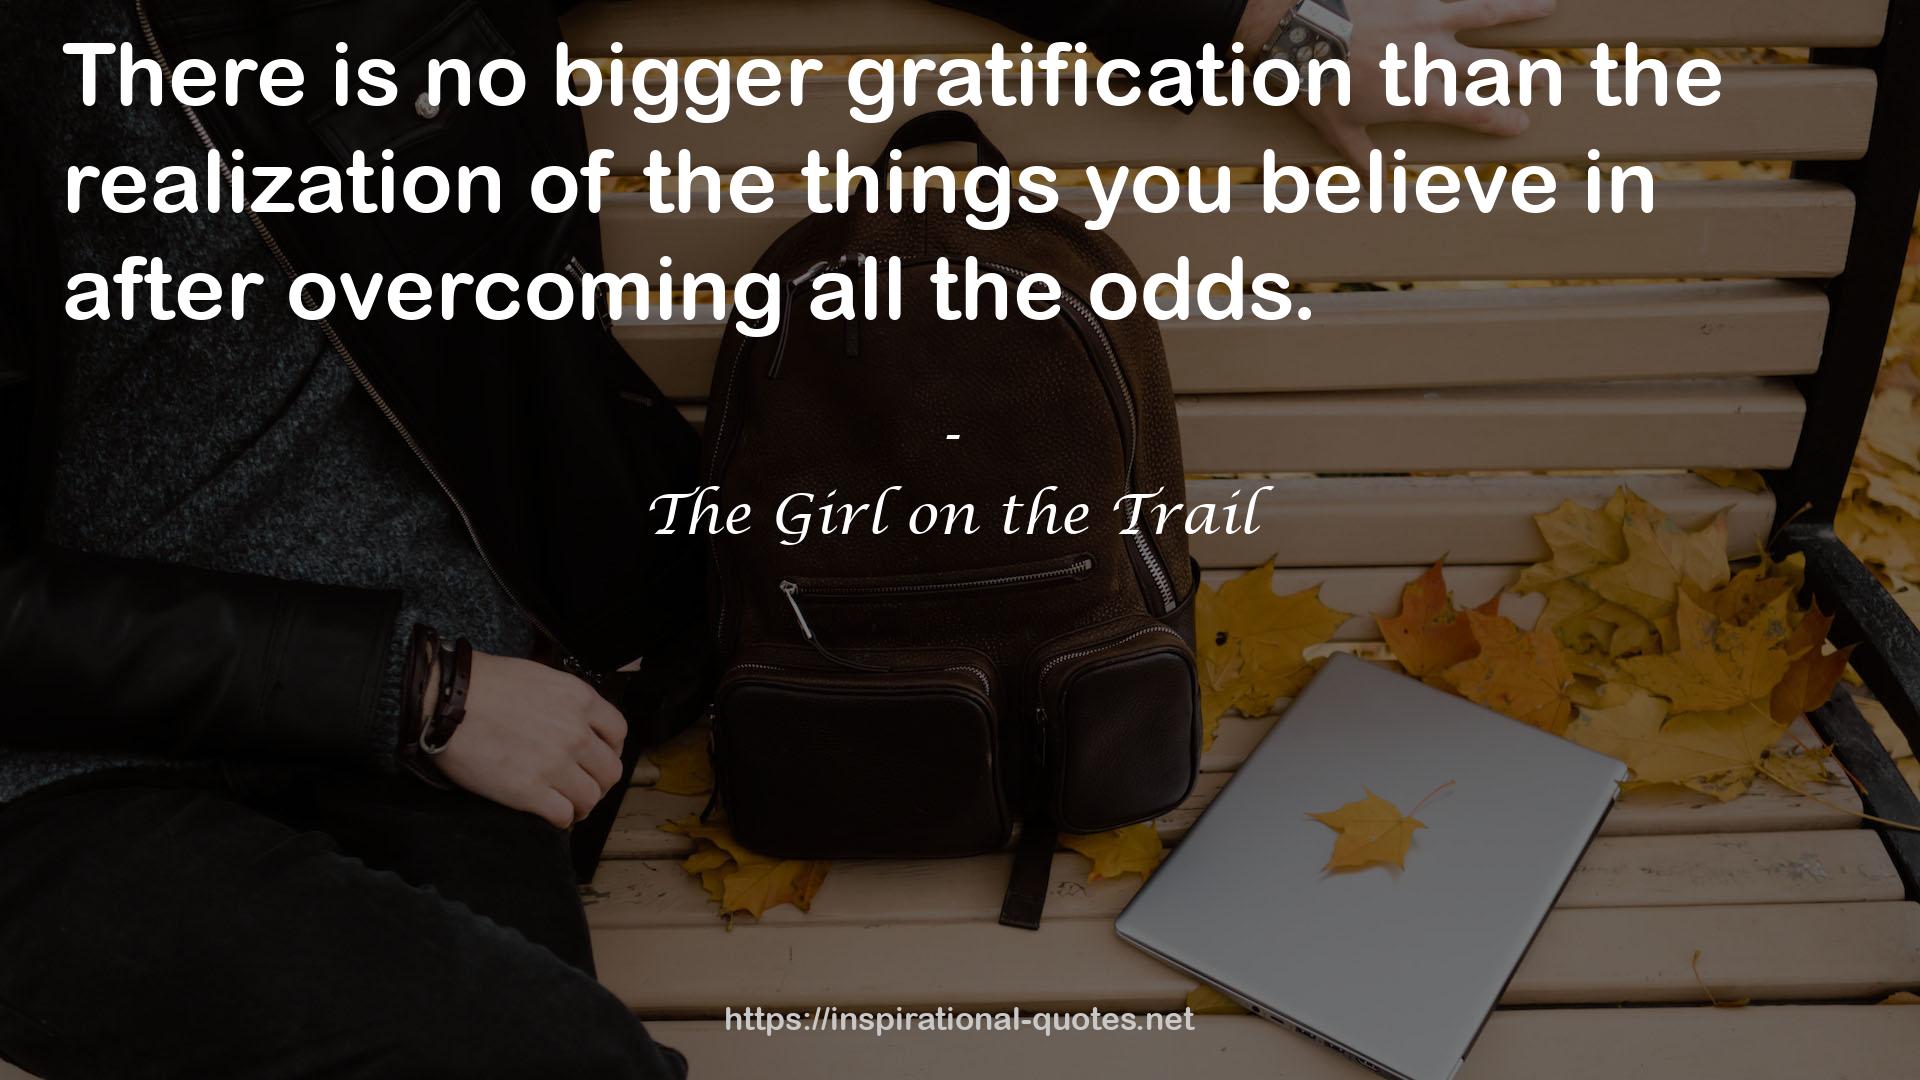 The Girl on the Trail QUOTES